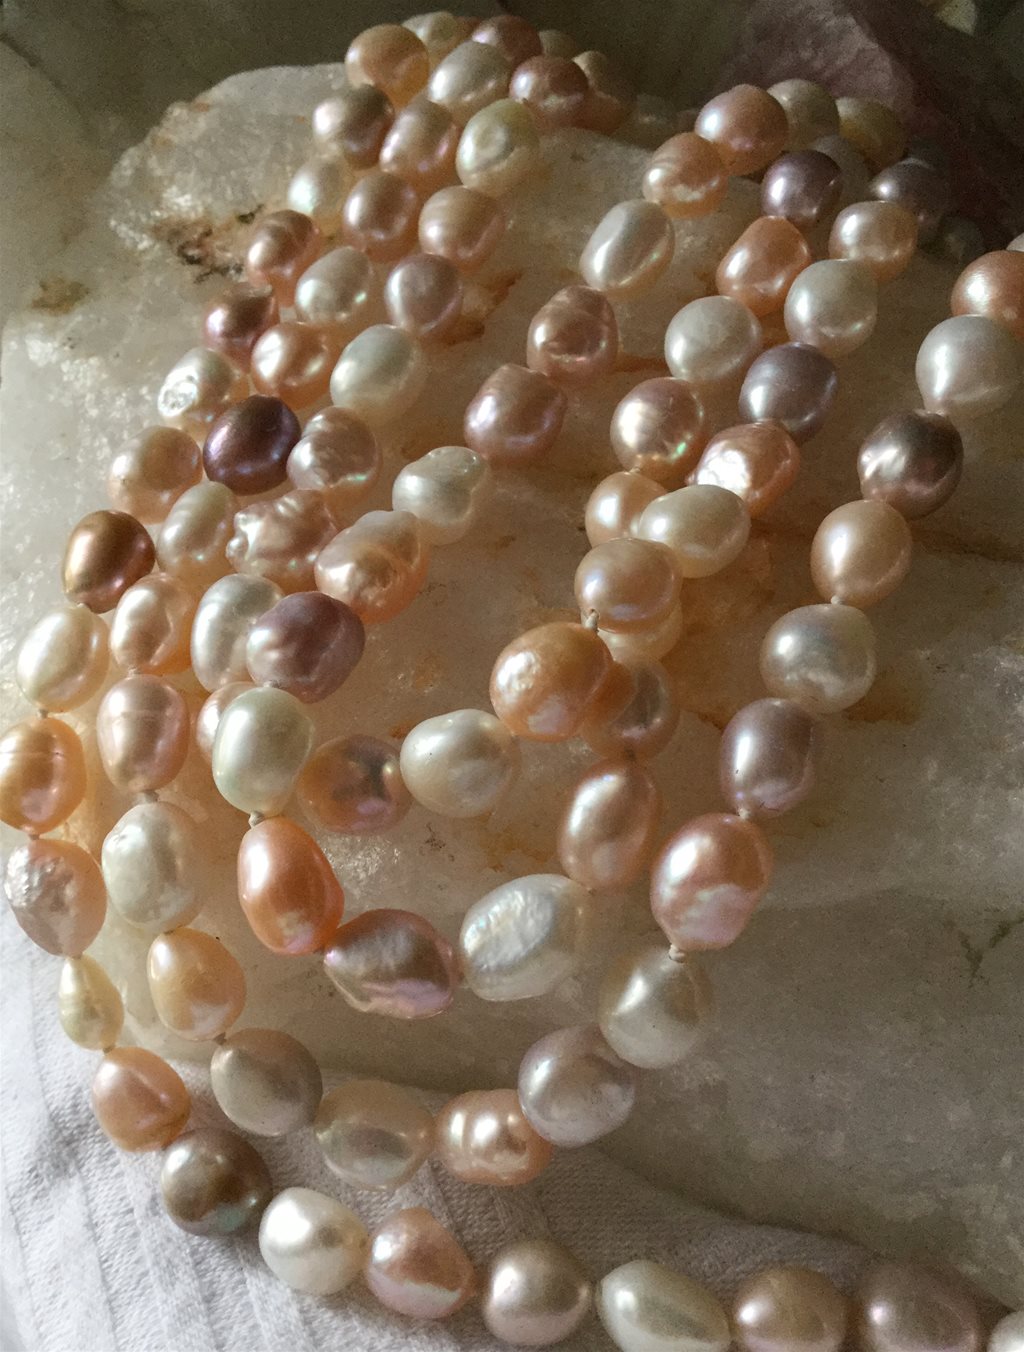 Baroque Pearls multi colour freshwater cultured nugget pearls 8/5 x 11 mm 164 cm strand - Image 2 of 4